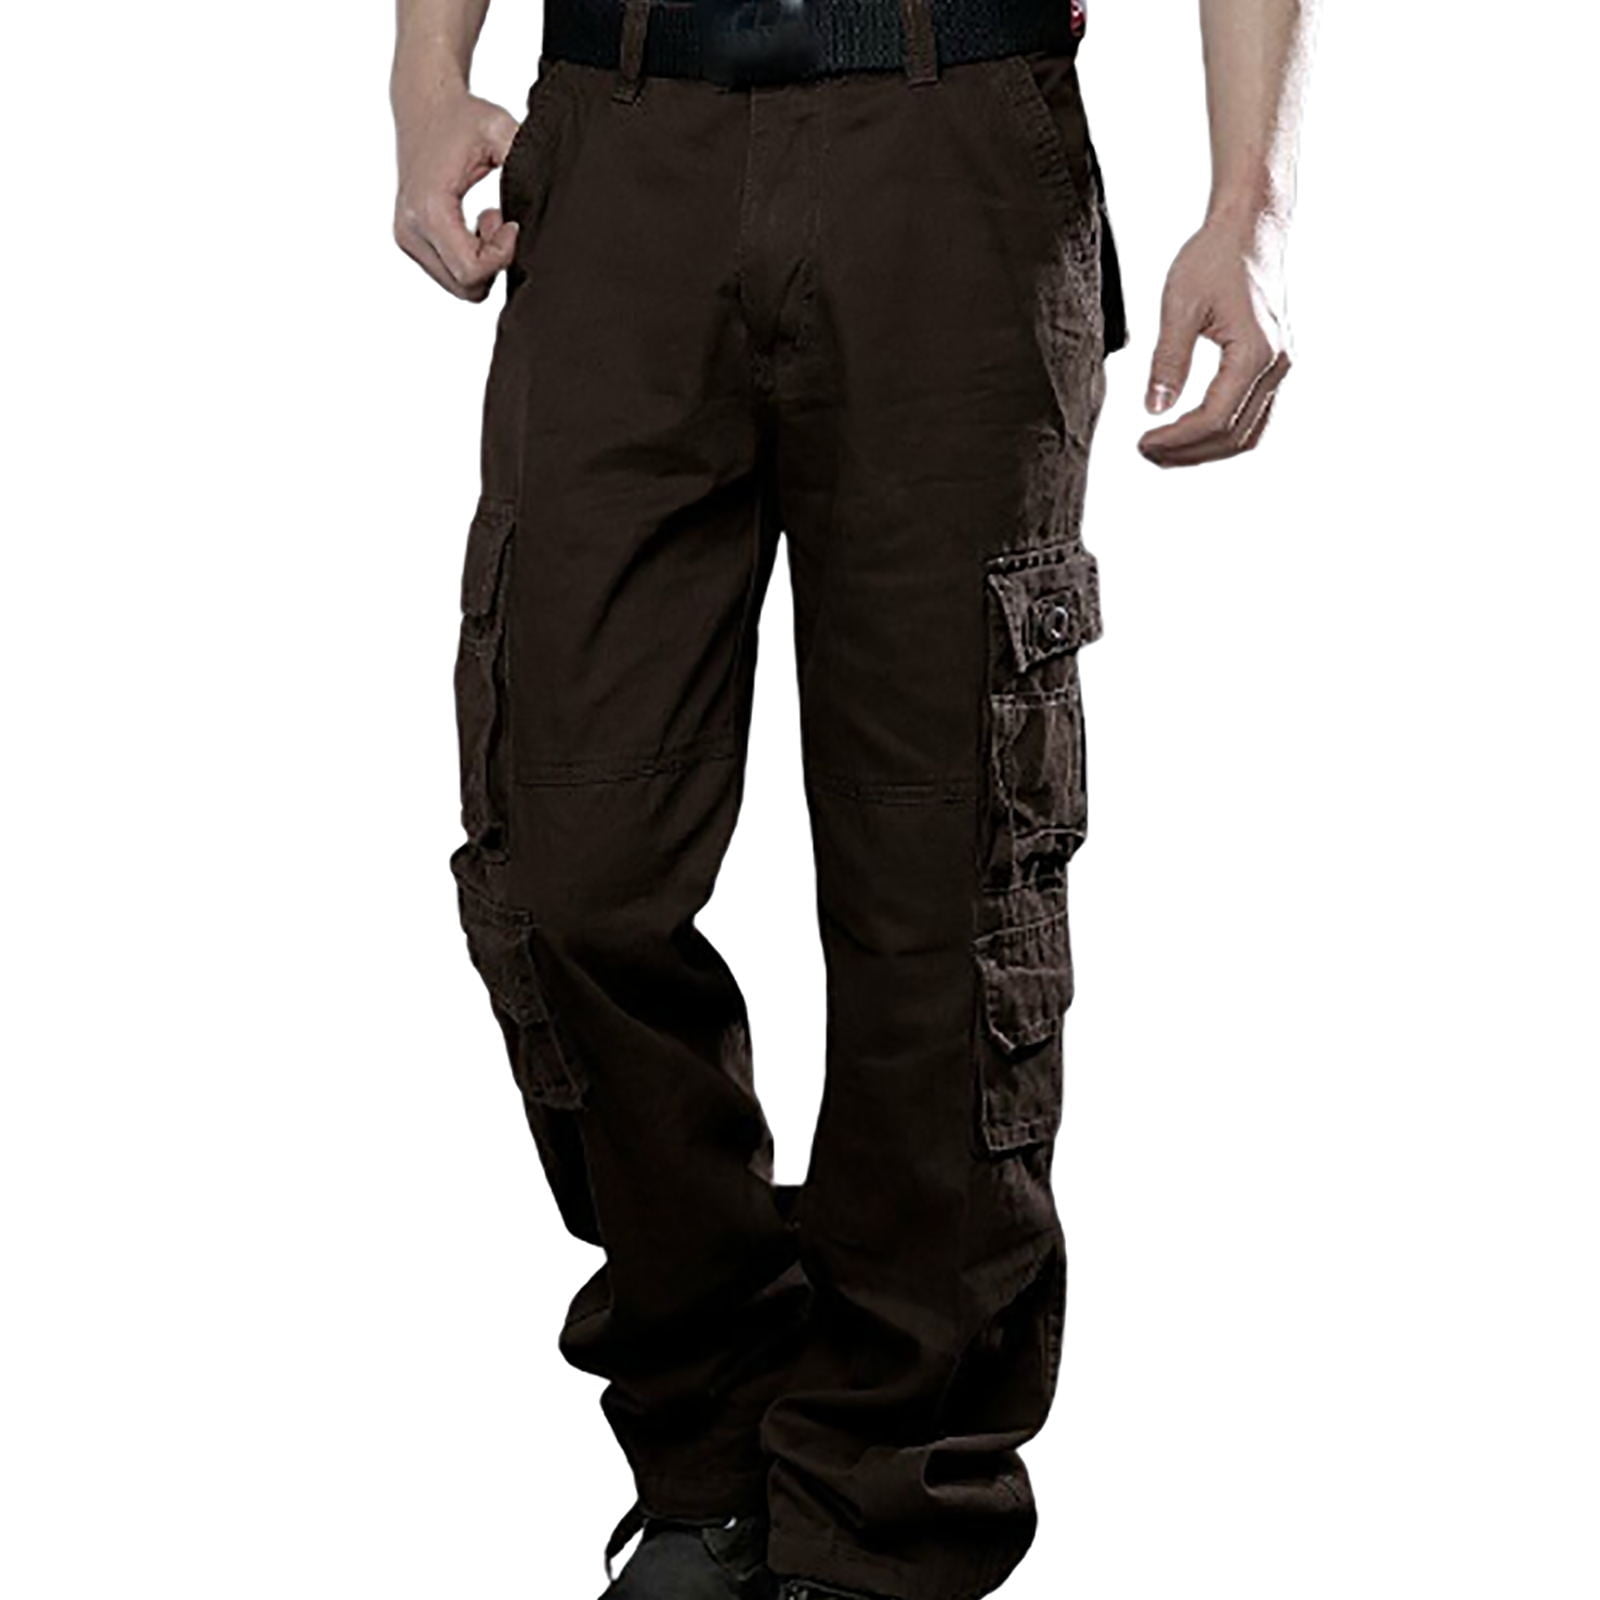 cllios Men's Cargo Pants Relaxed Fit Multi Pockets Pants Work Combat ...